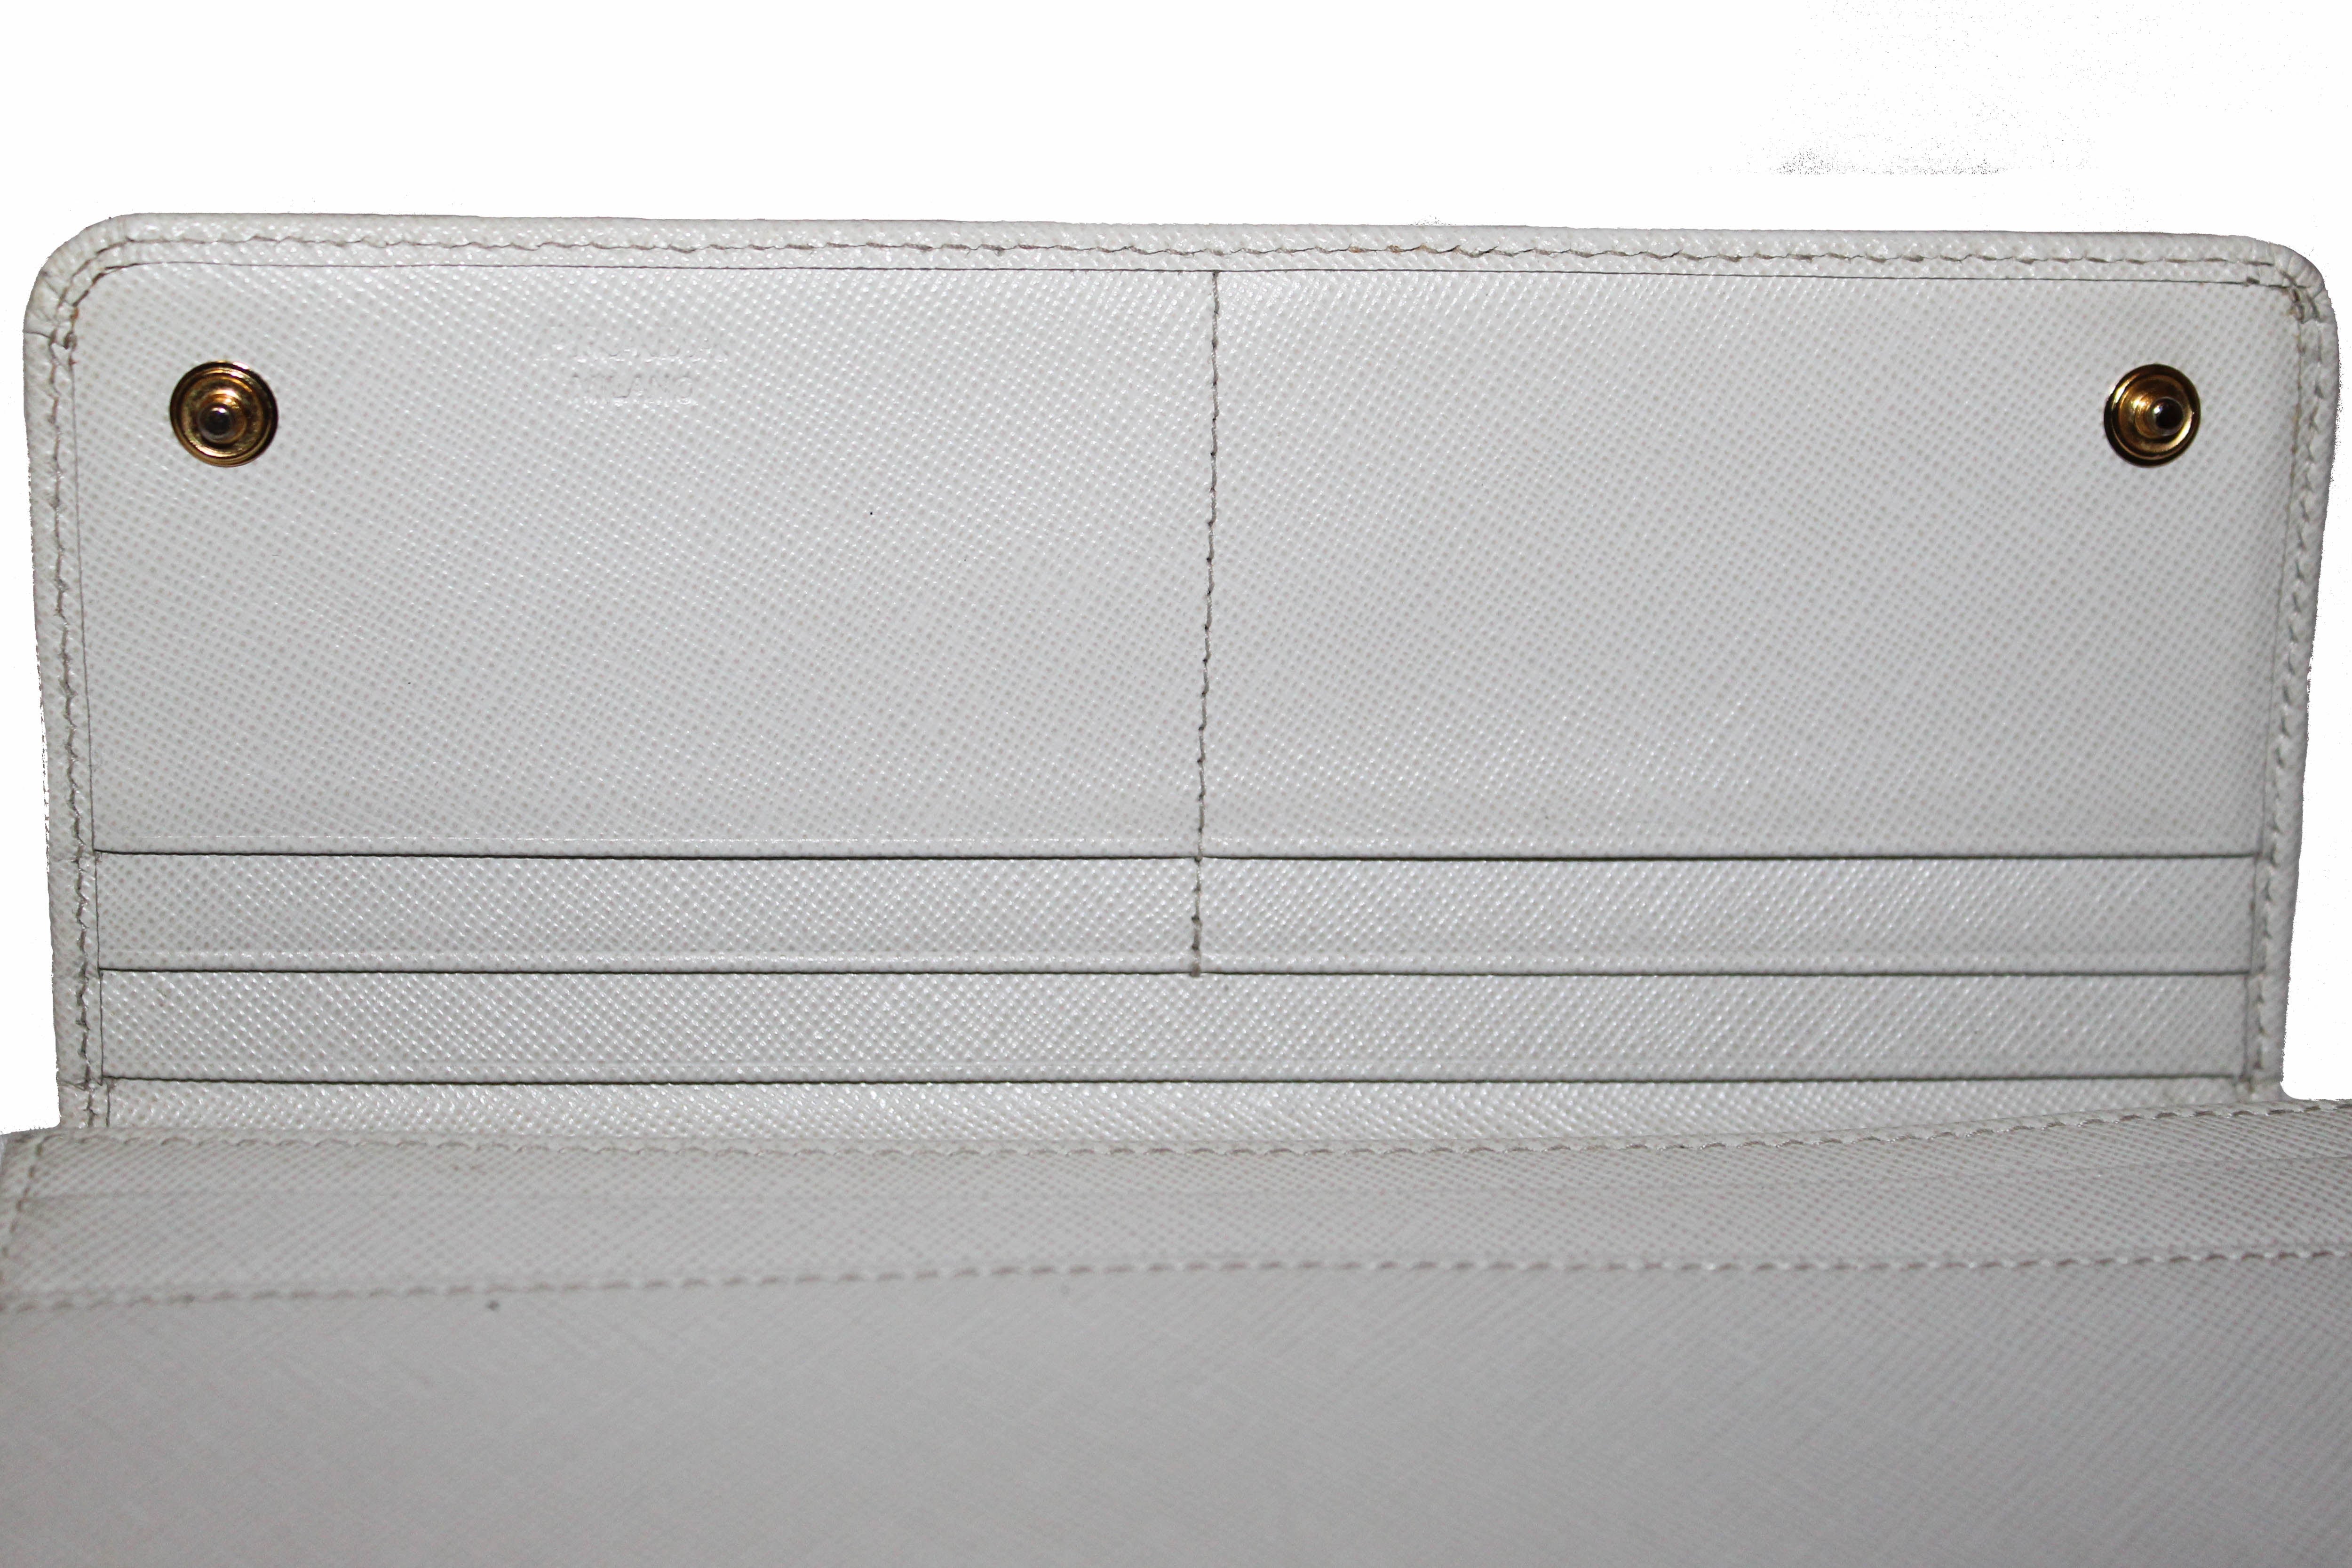 Authentic Prada Ivory Saffiano Leather Continental Flap Wallet